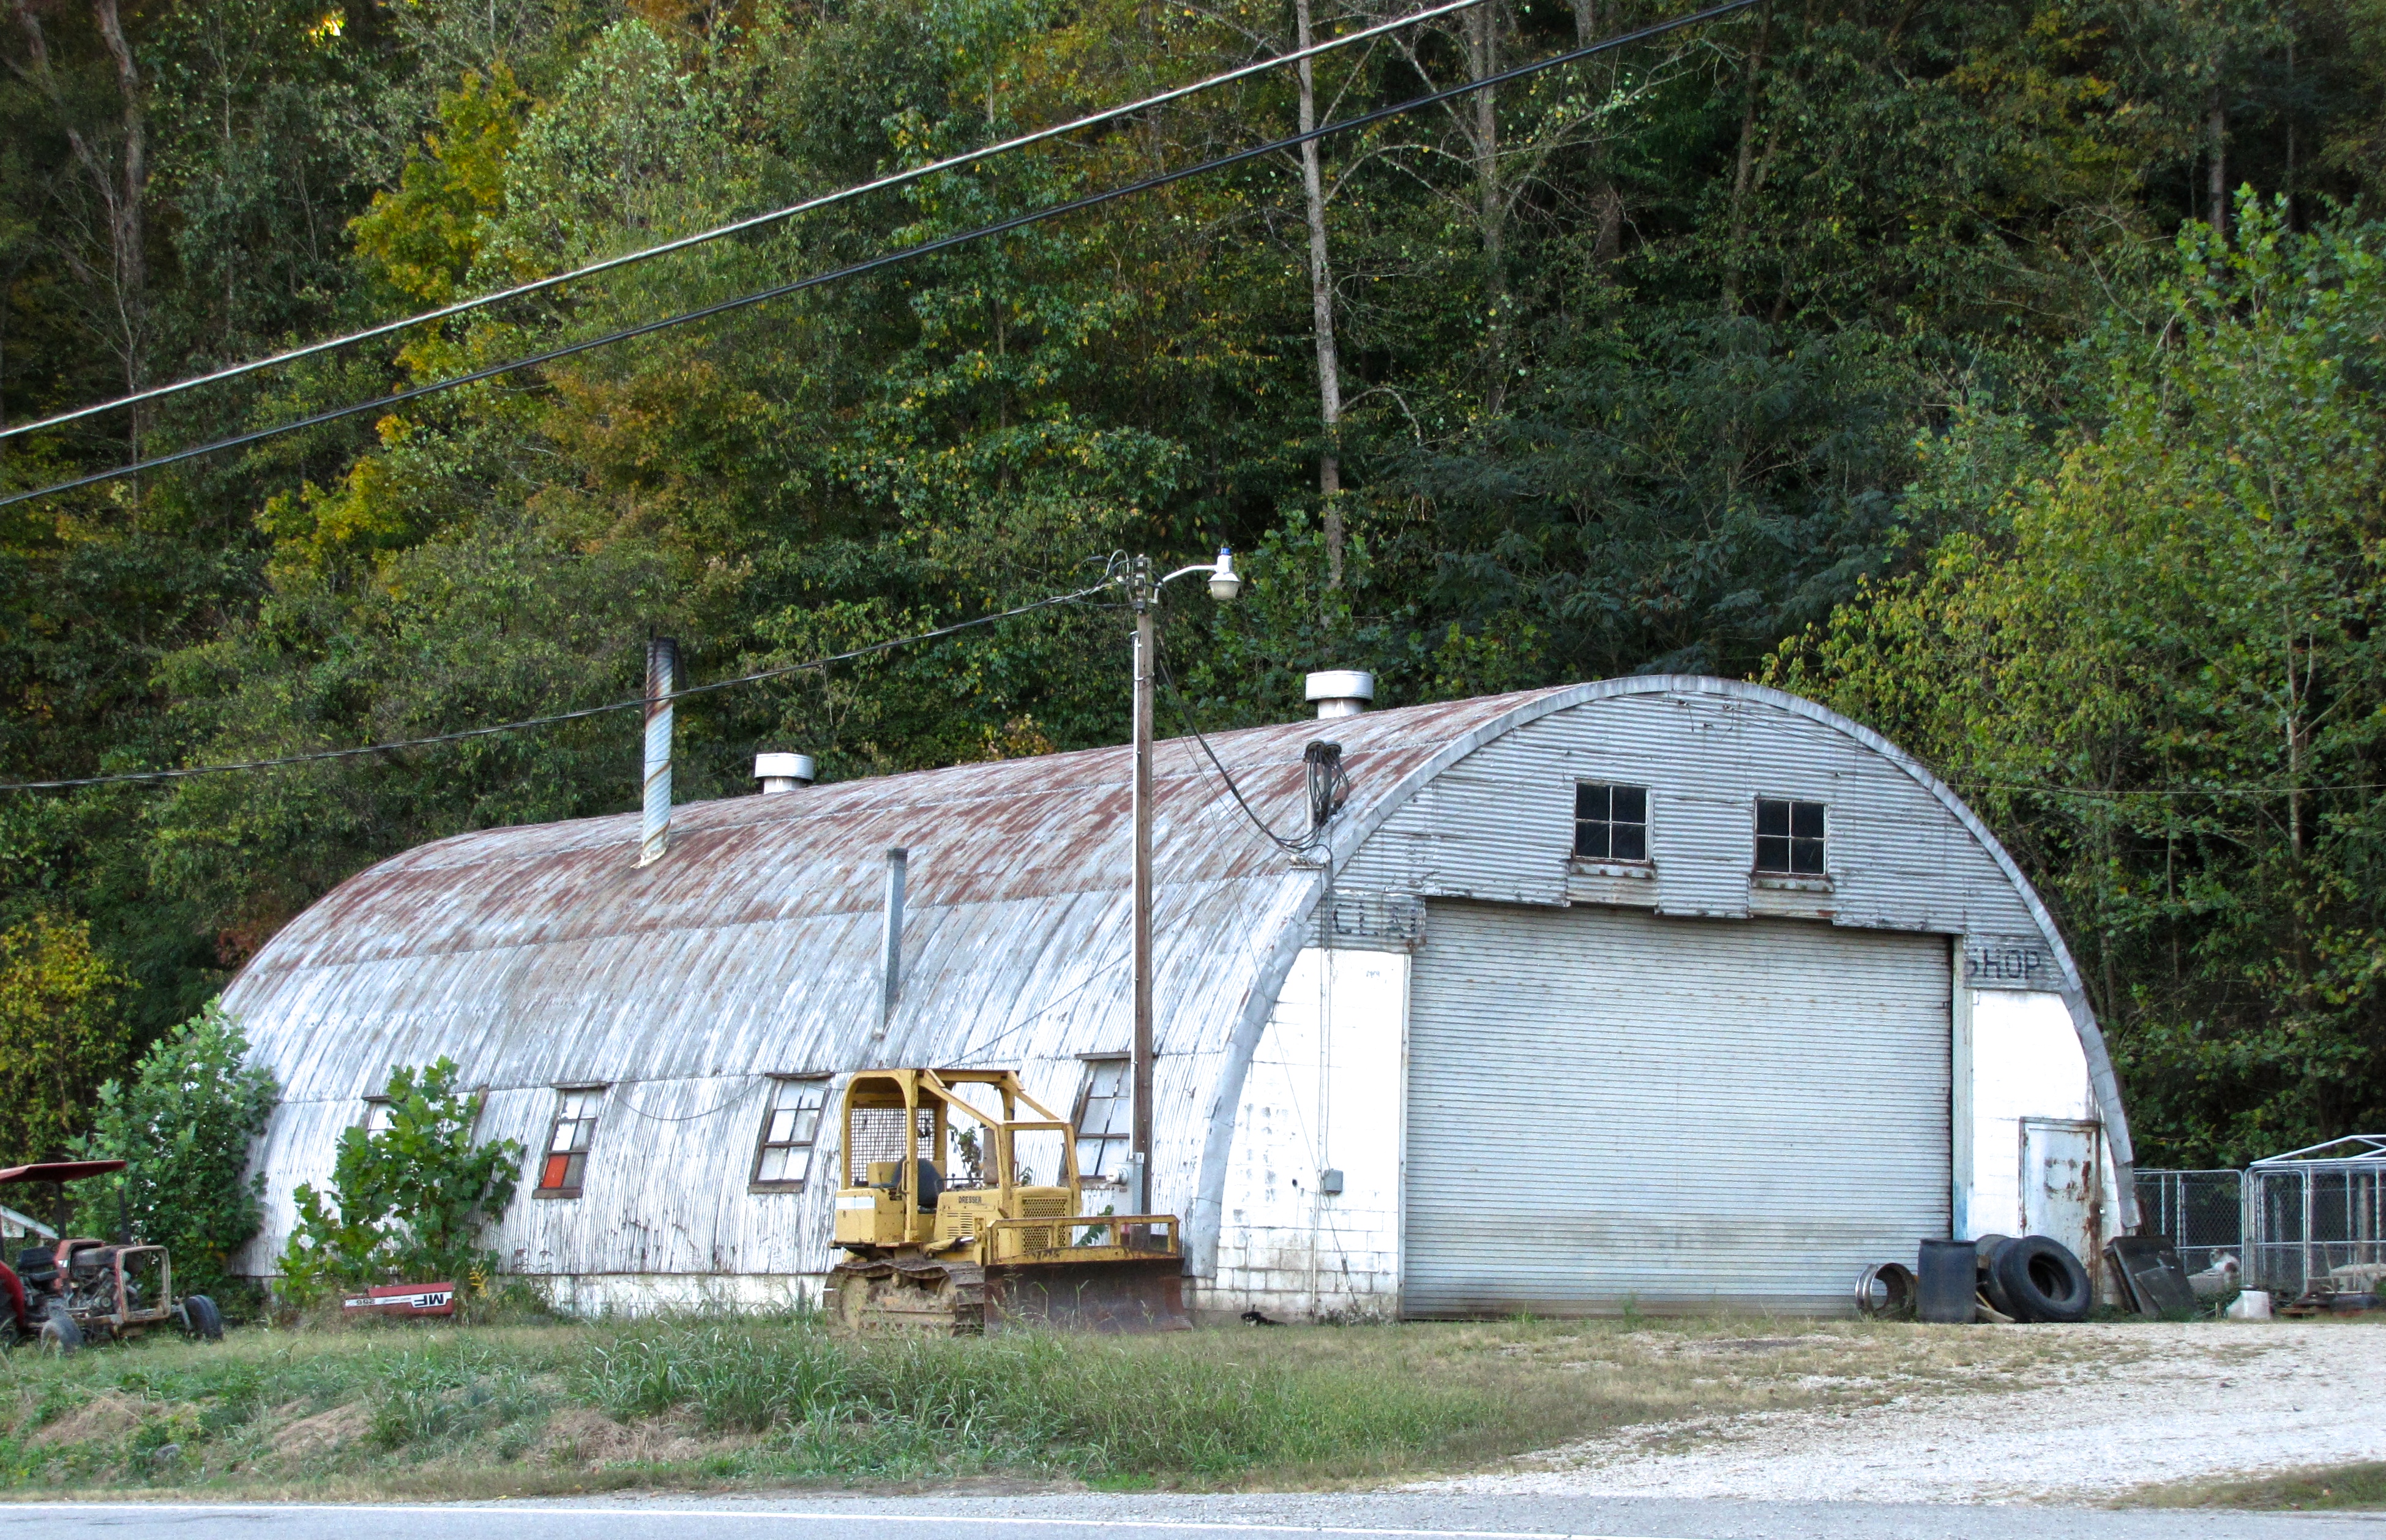 quonset hut in Pascagoula, MS